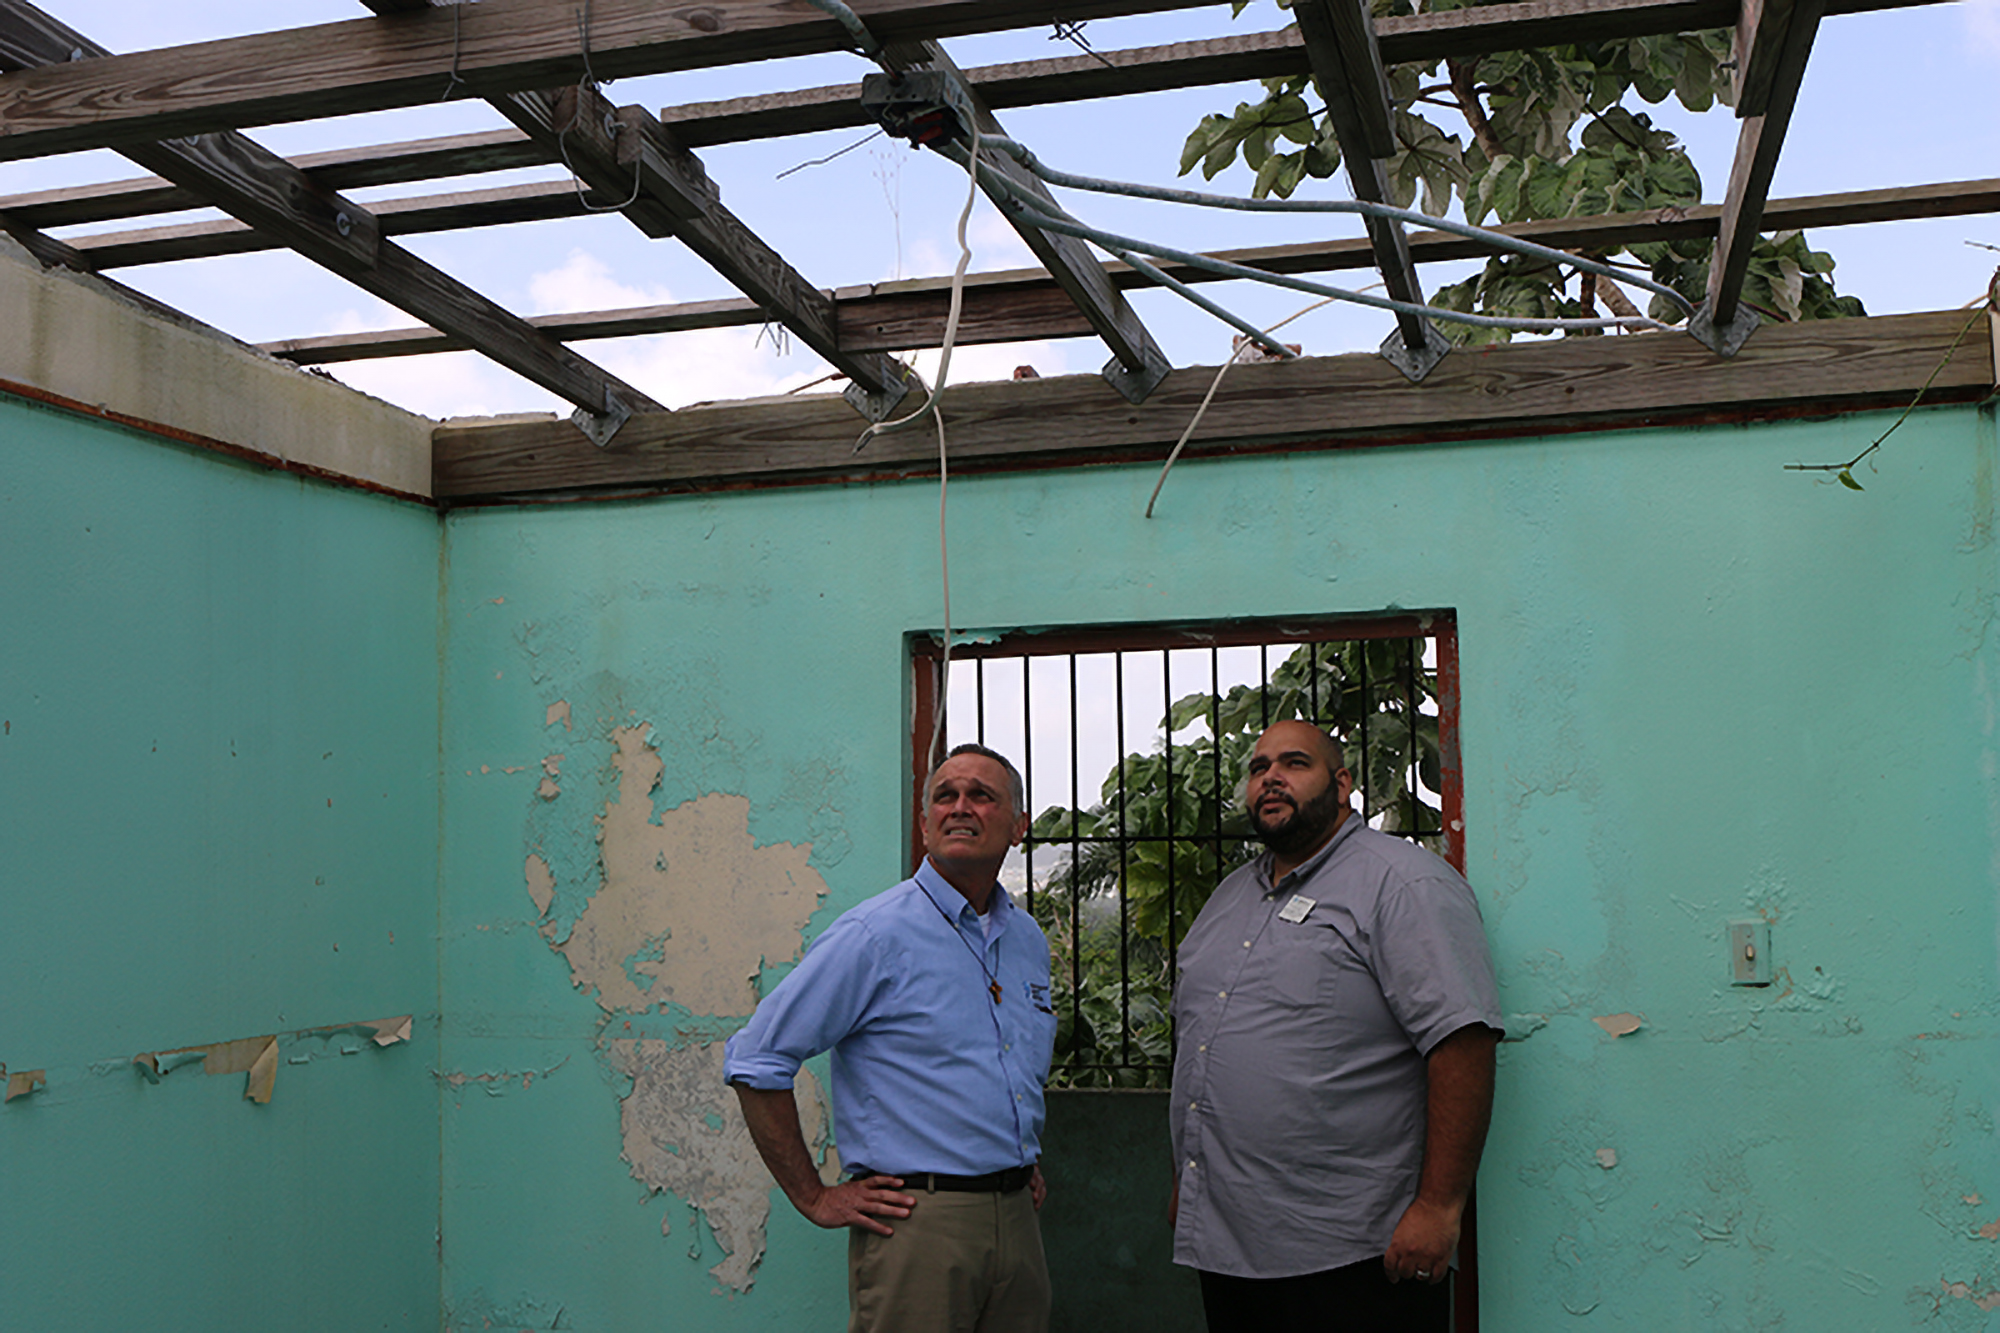 Rev. Dr. Jim Kirk and Rev. Edwin González-Castillo with PDA, review damage to a building the local church hopes will soon become a nurses’ station in Guaynabo. Photo by Rick Jones.